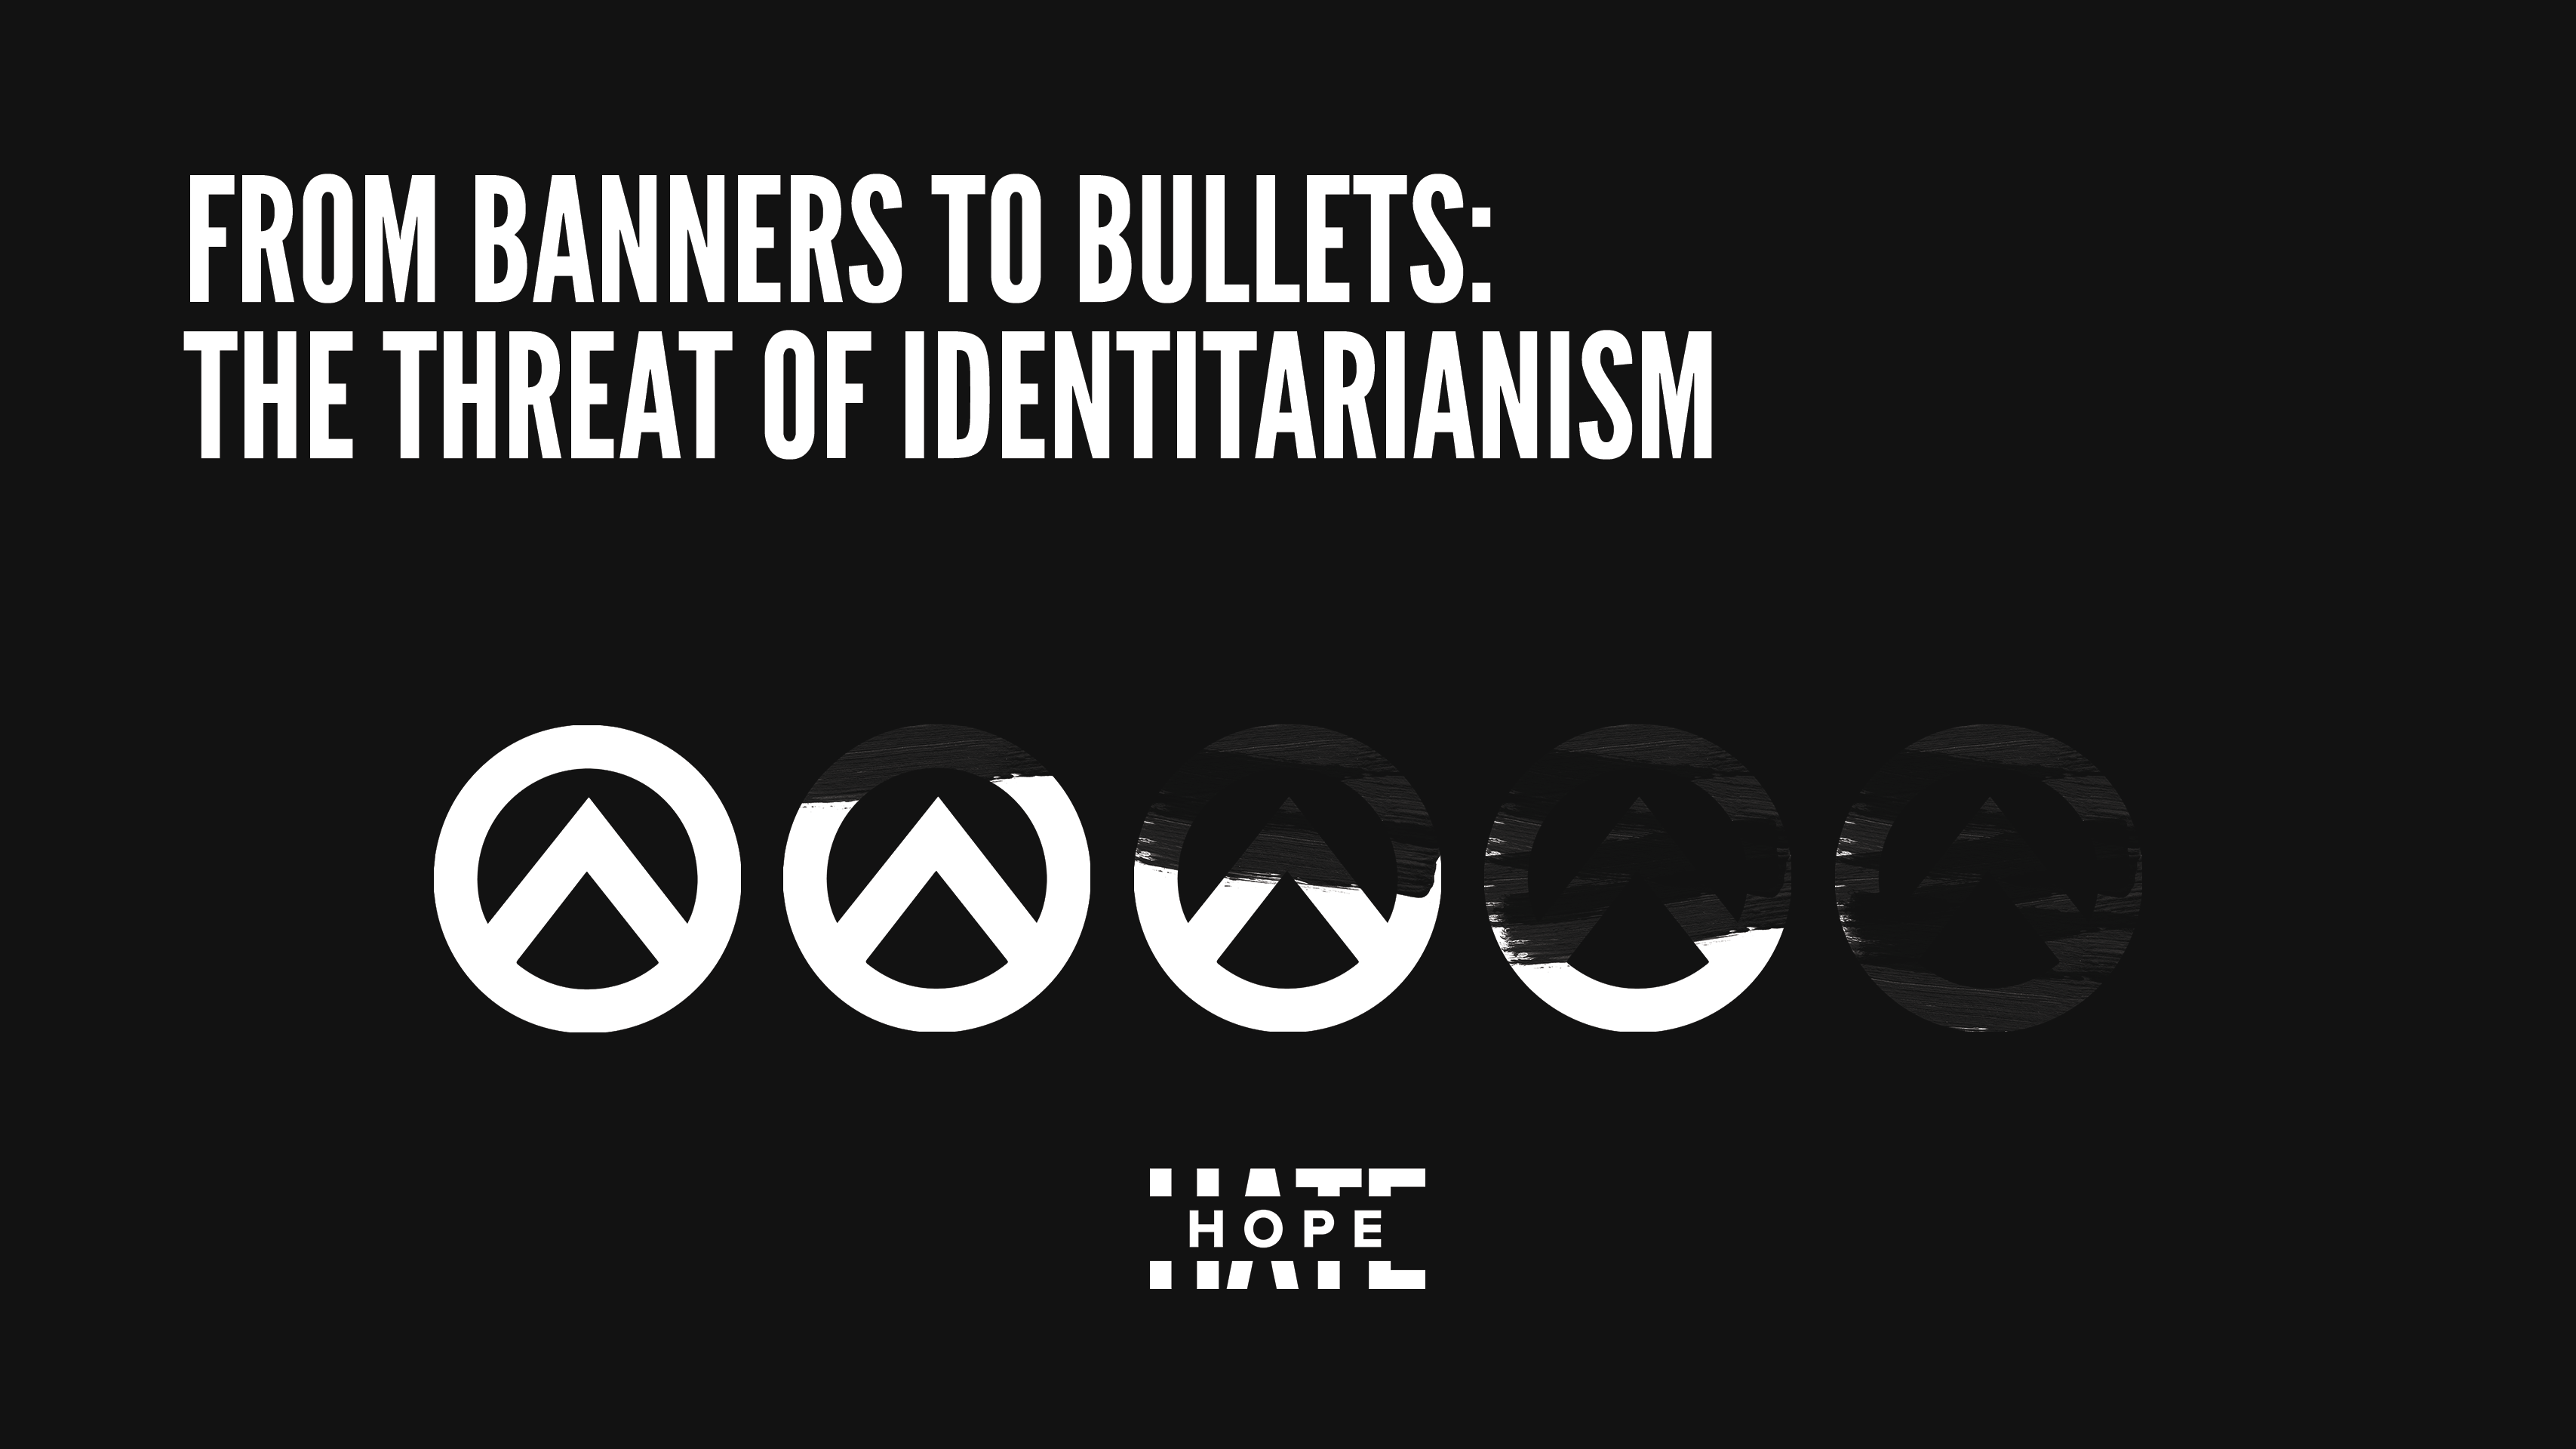 a black graphic graphic with white text which reads "Banners to Bullets: The Threat of Identitarianism"